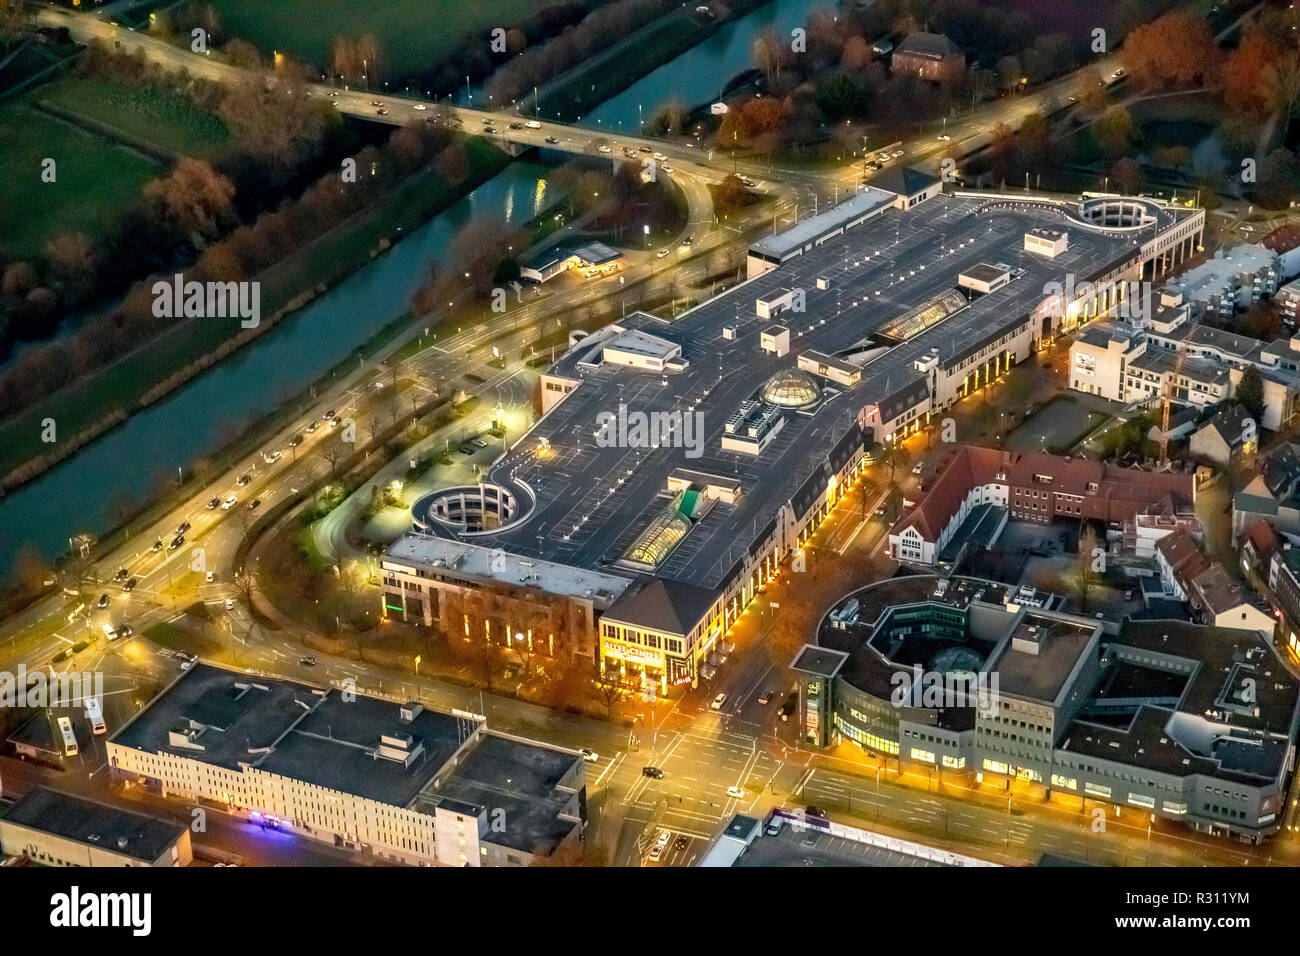 On the mind, DEU, Germany, Europe, Hamm, Hamm Central Station, SRH College of Logistics and Economics, downtown Hamm, Kleist Forum, aerial photography Stock Photo